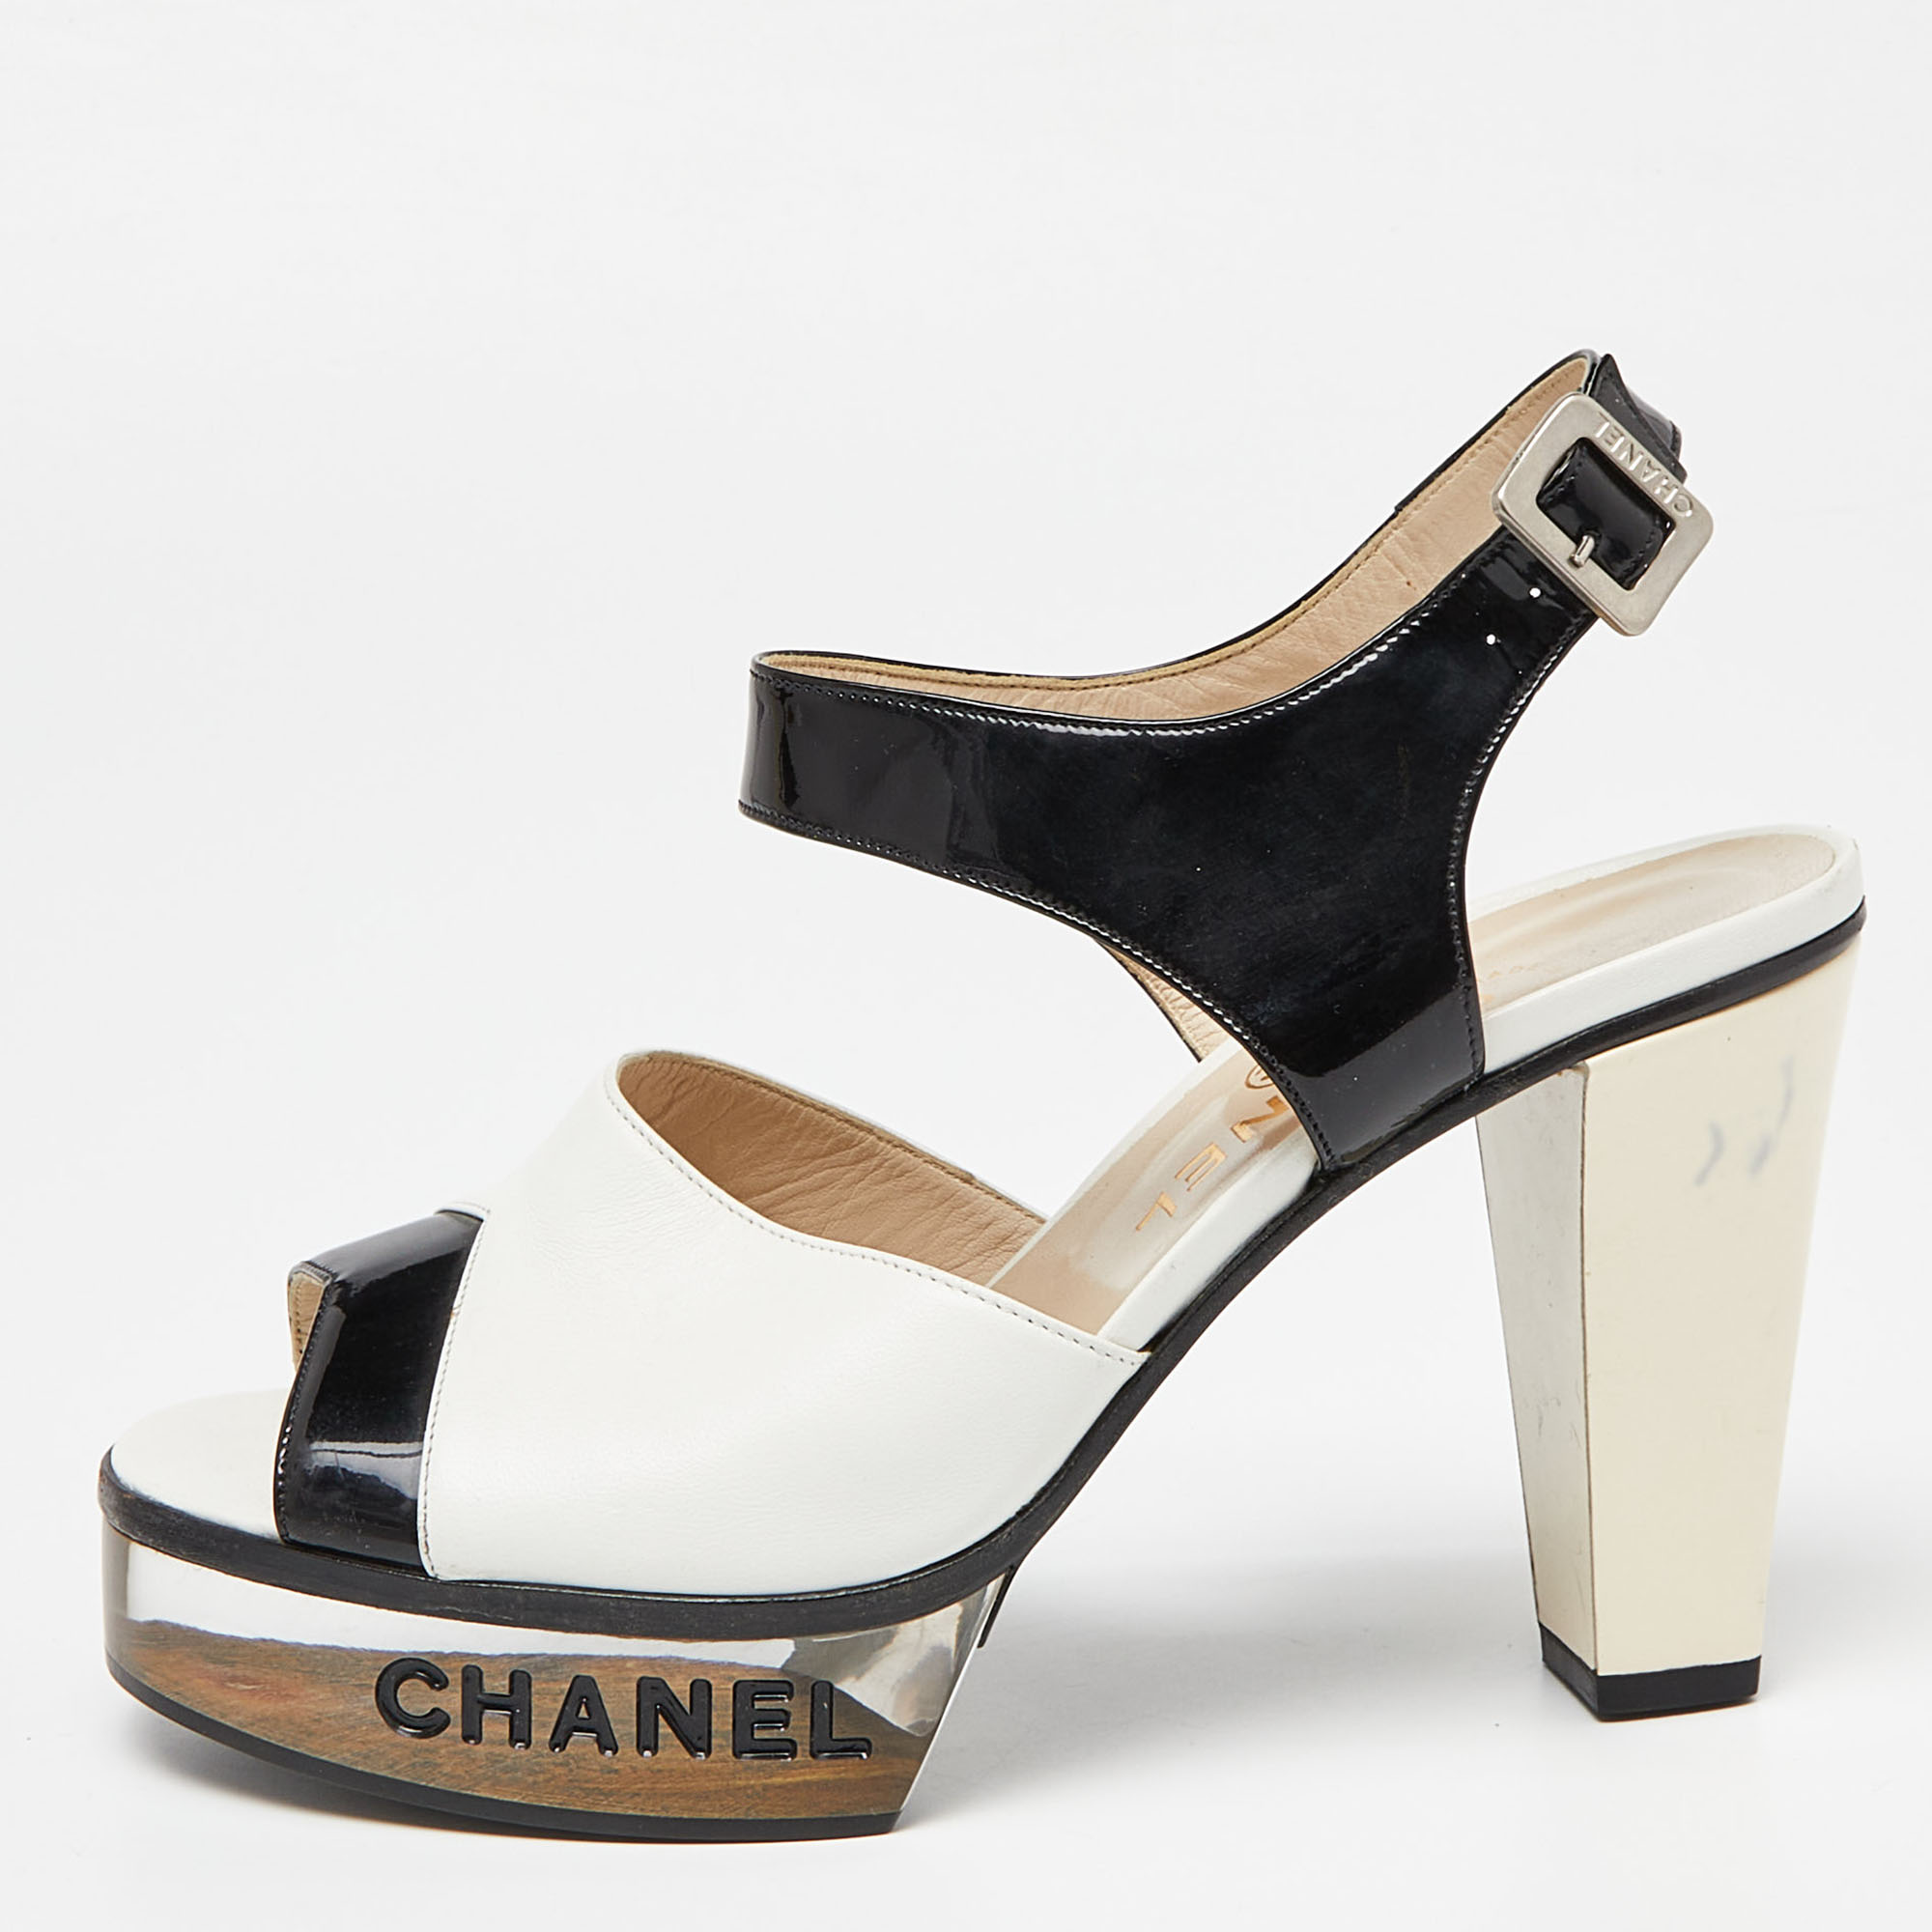 Chanel White/Black Leather And Patent Platform Ankle Strap Sandals Size 37.5